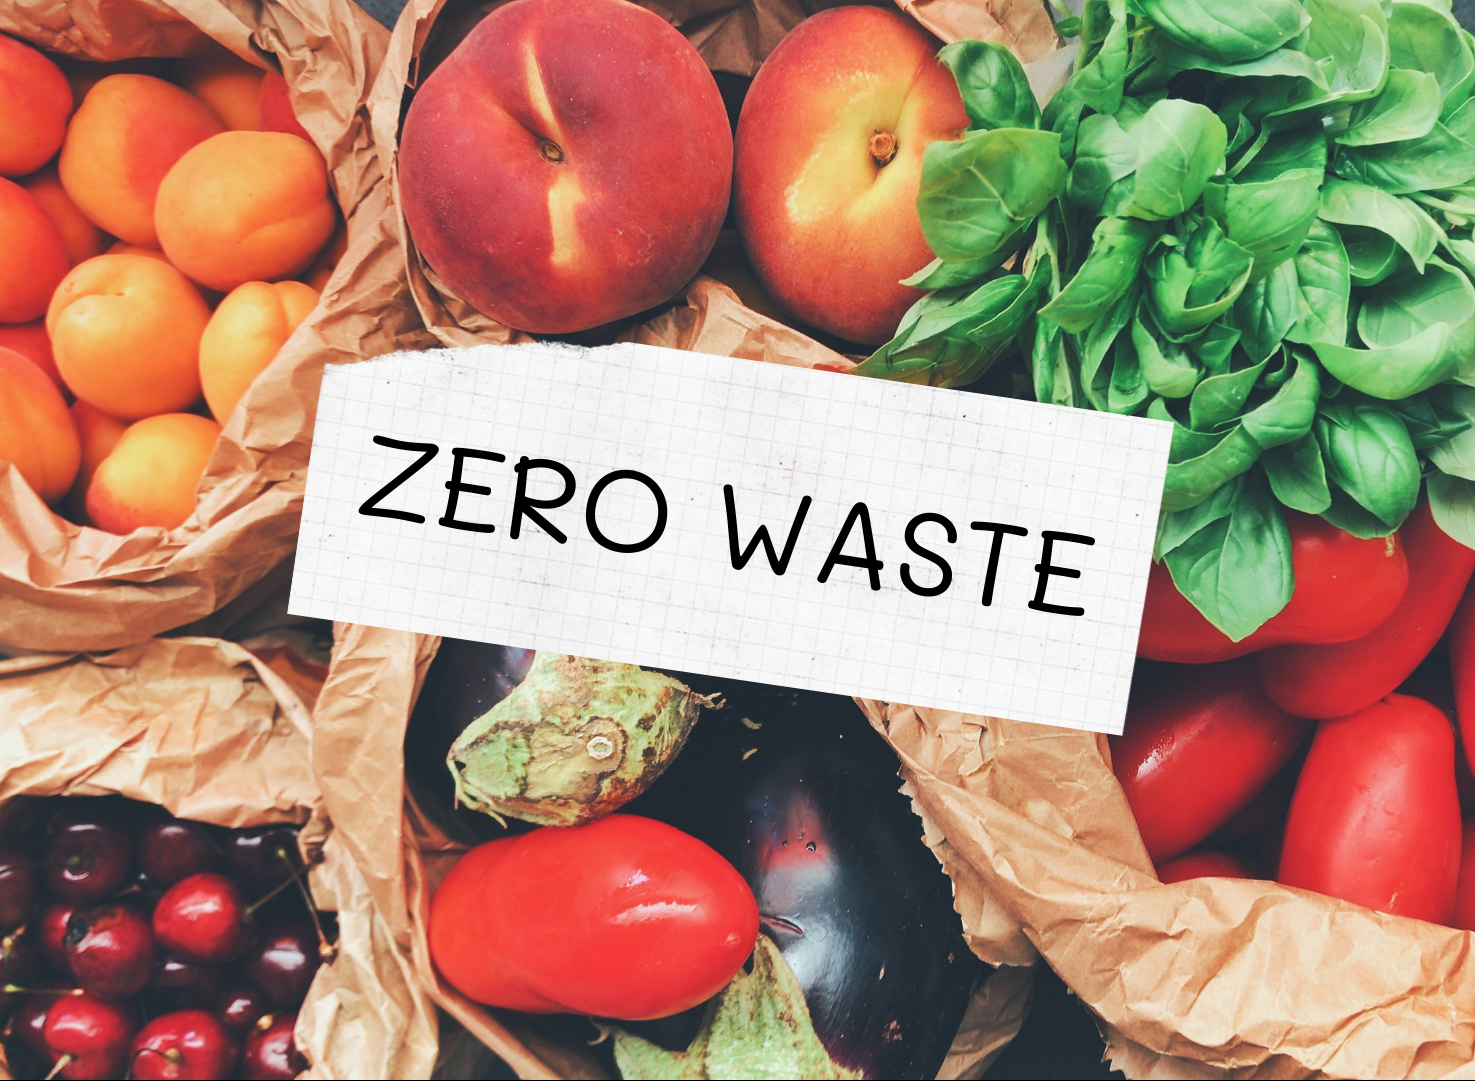 Promoting the concept of "Zero Waste" living